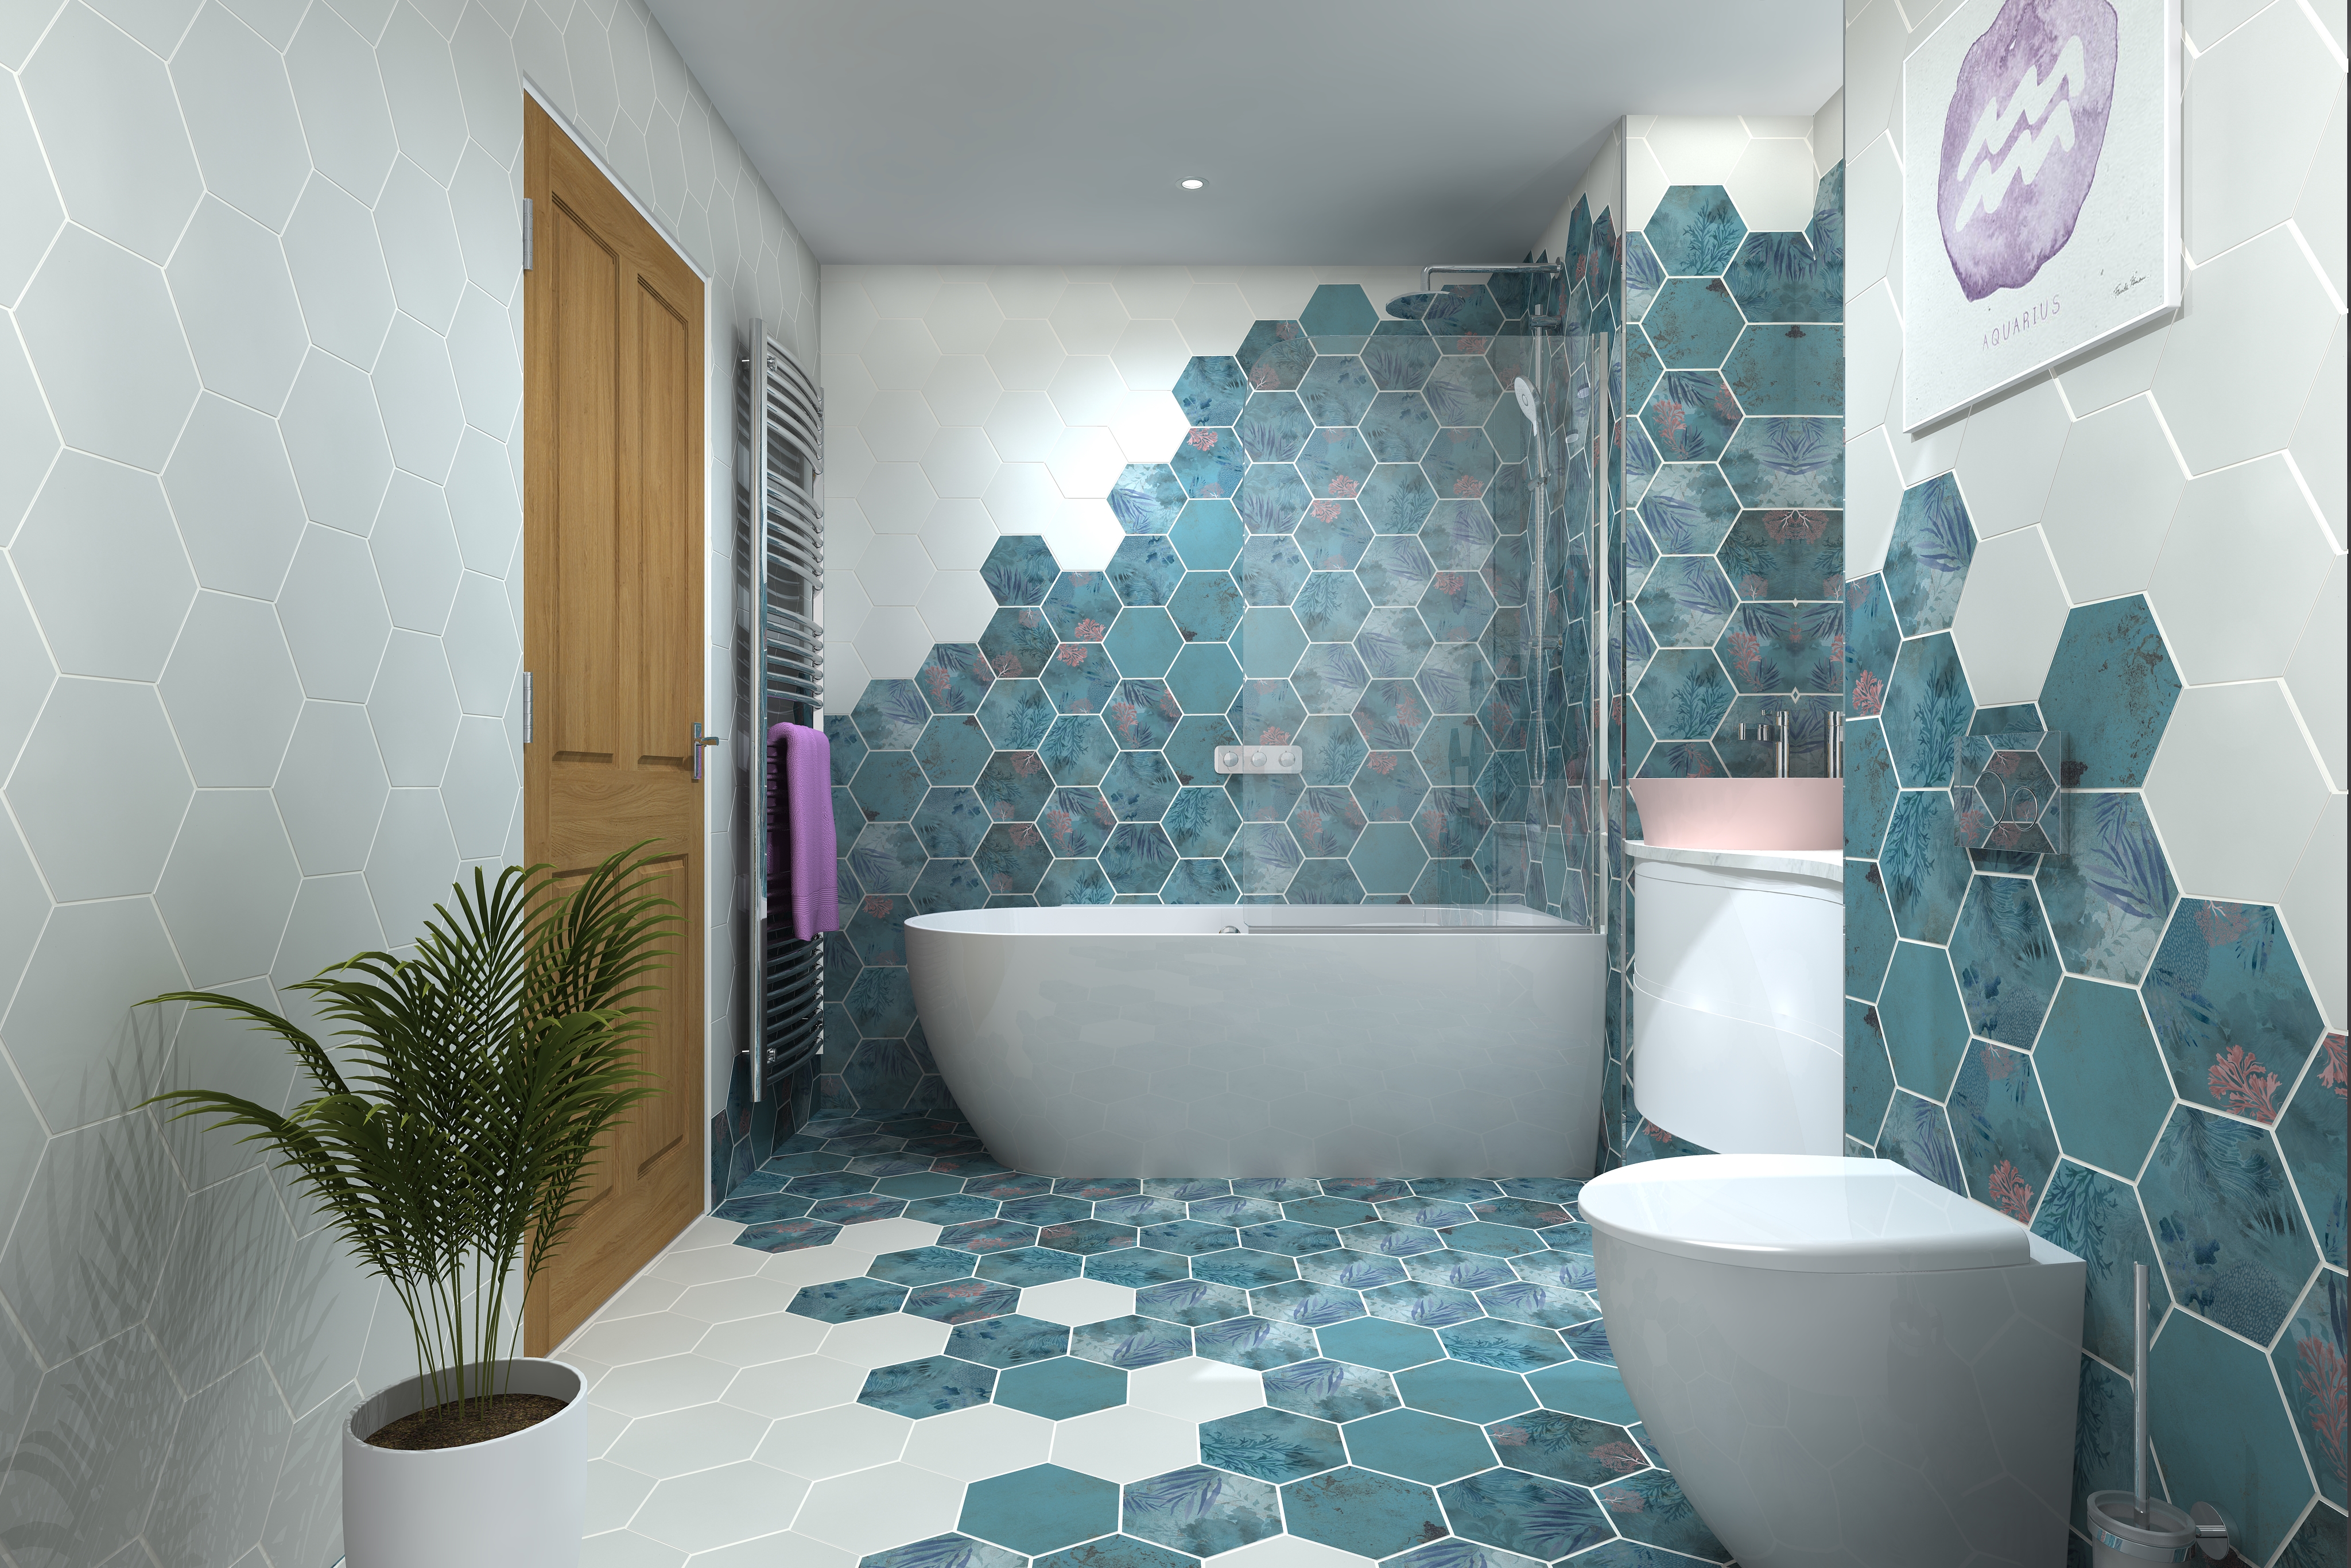 Digital lifestyle image of the Aquarius inspired bathroom, with pale blue back to wall toilet paired with chome push plate, toilet roll holder and wall mounted toilet brush holder, potted plant, chrome curved radiator, pale blue D shaped shower bath and glass bath screen